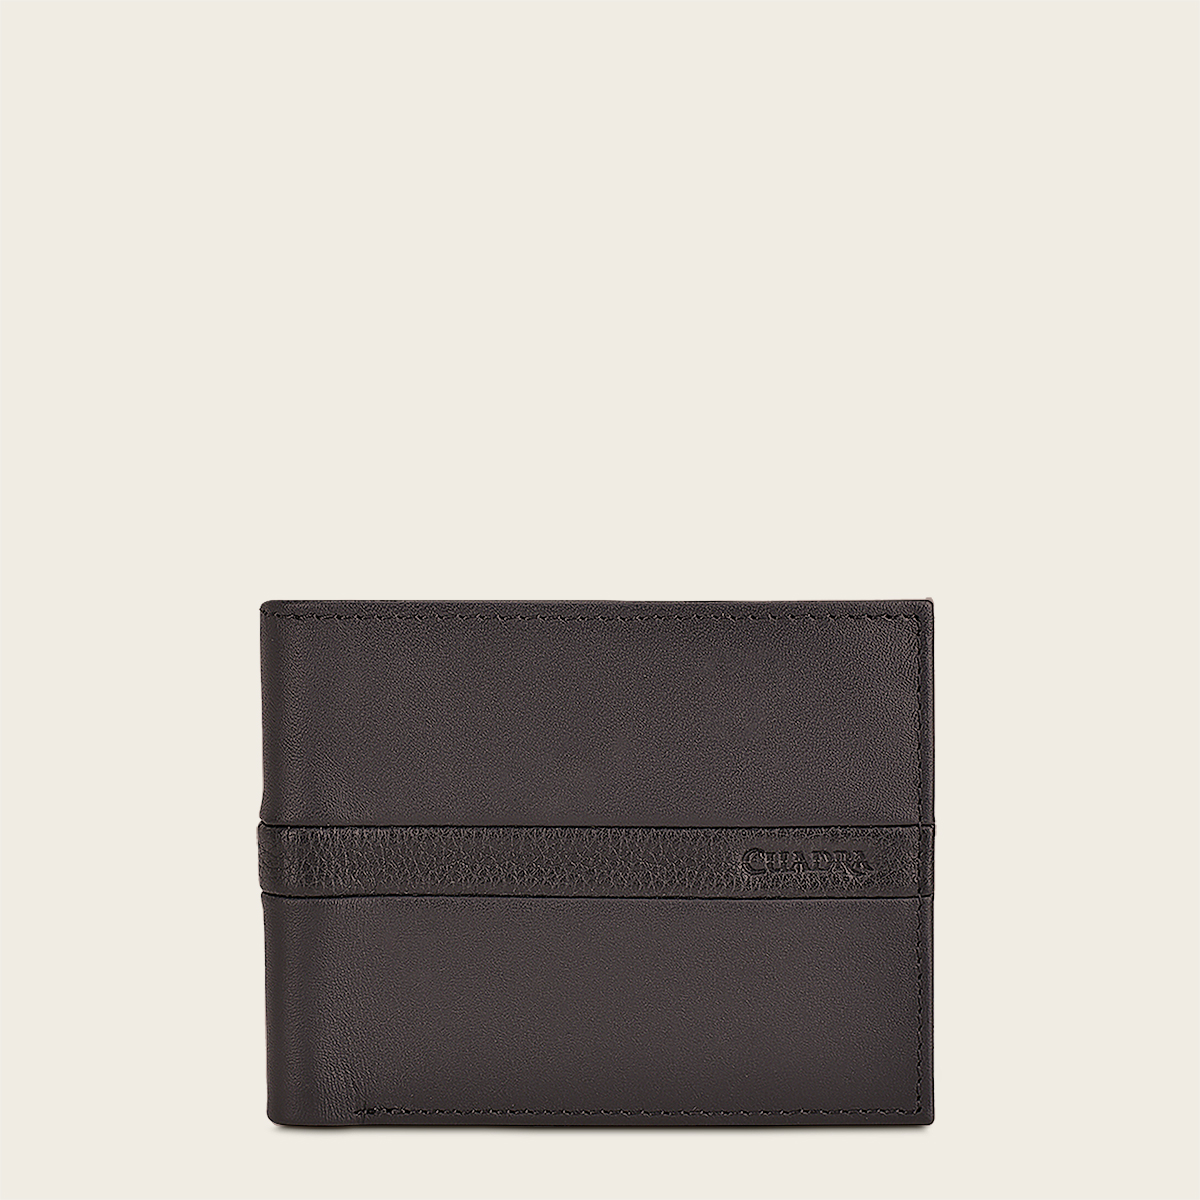 Contrasting leather strap brown leather wallet